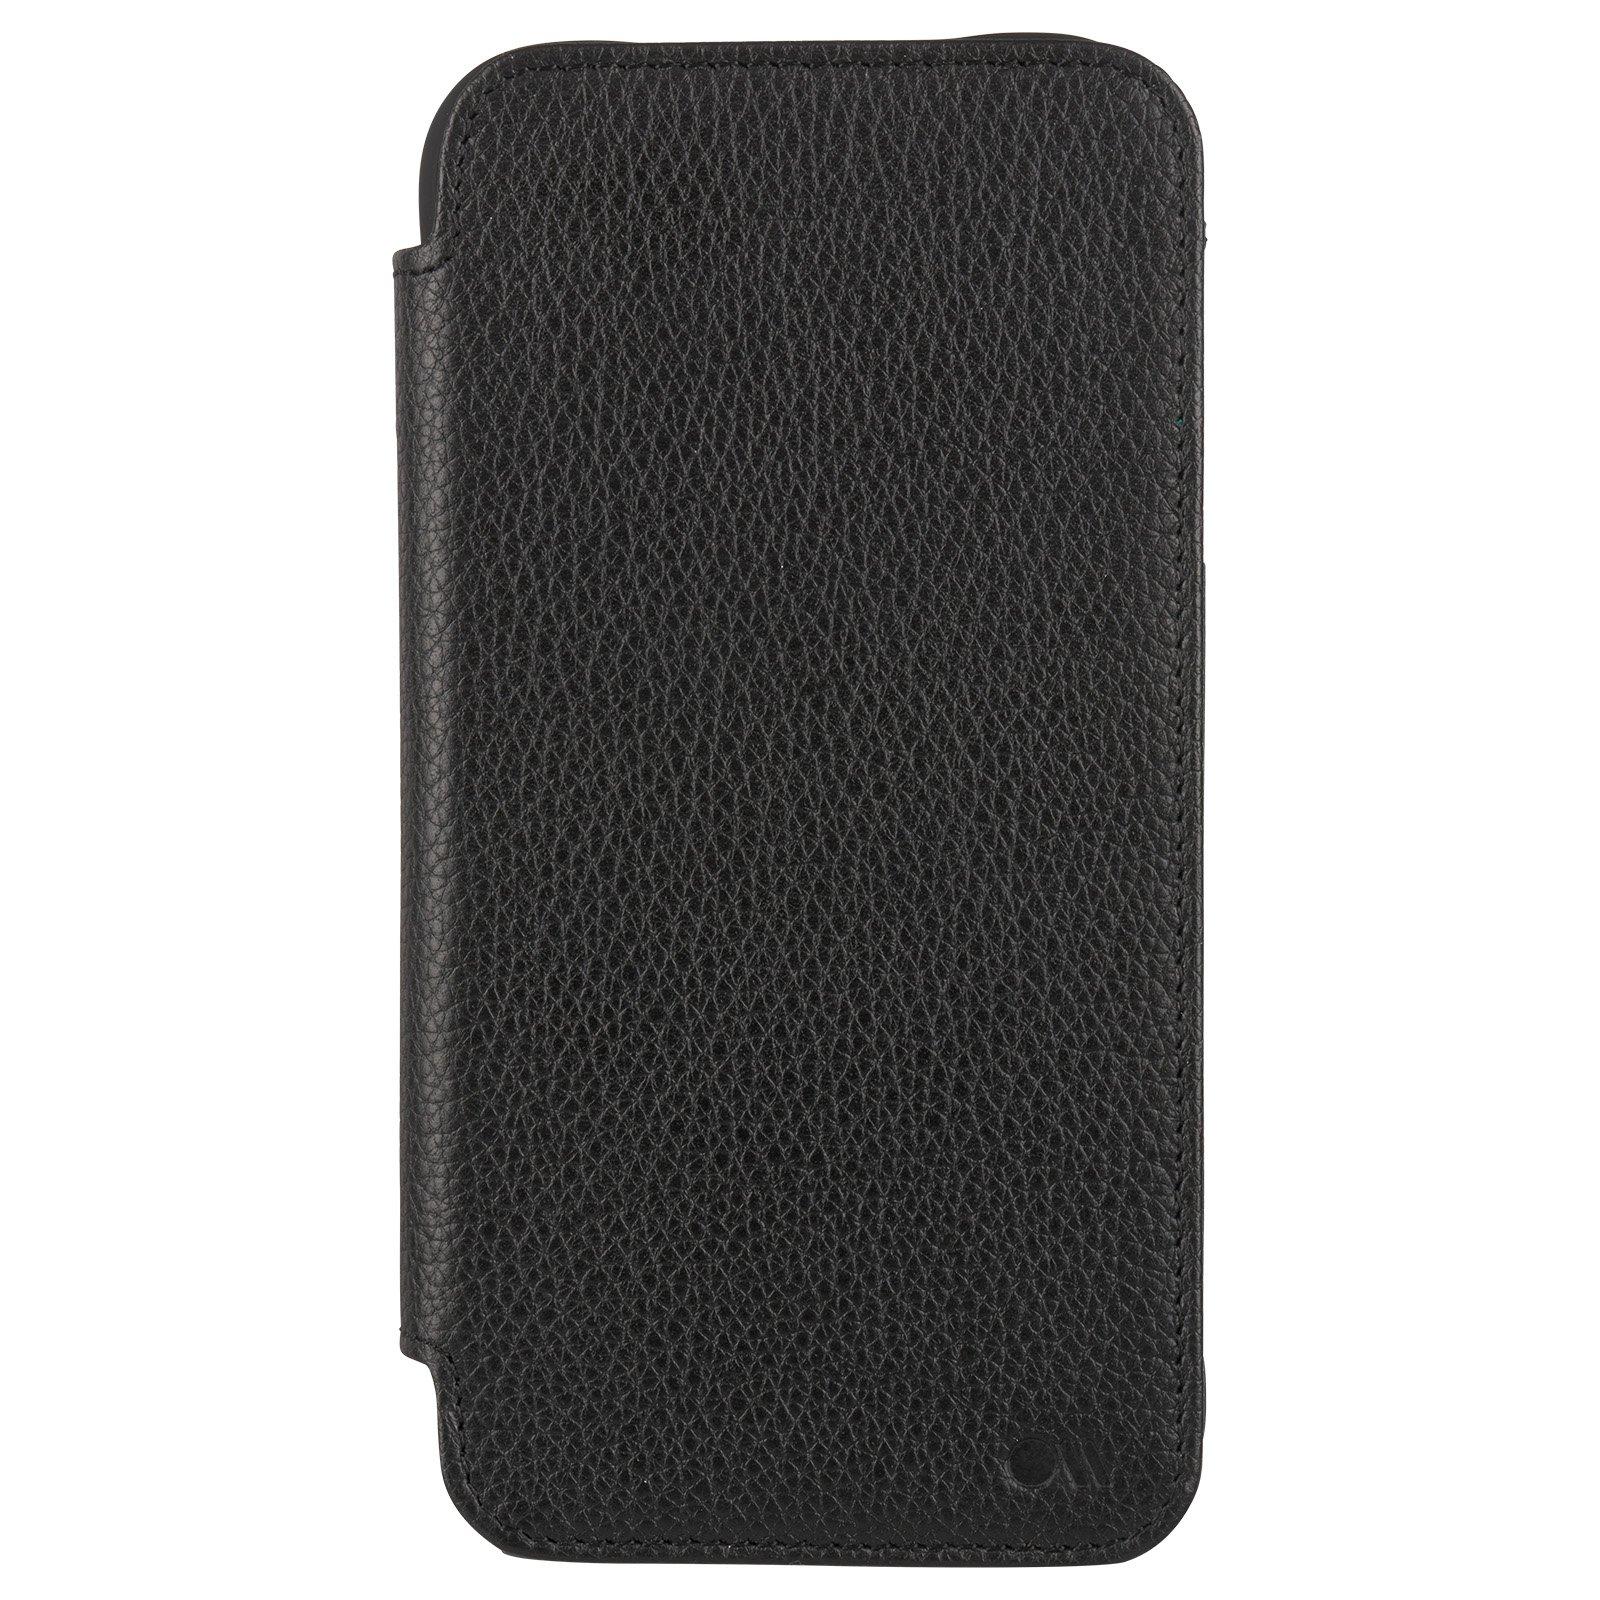 Case-Mate Wallet Folio MagSafe Case for iPhone 13 Pro Max / 12 Pro Max - Black